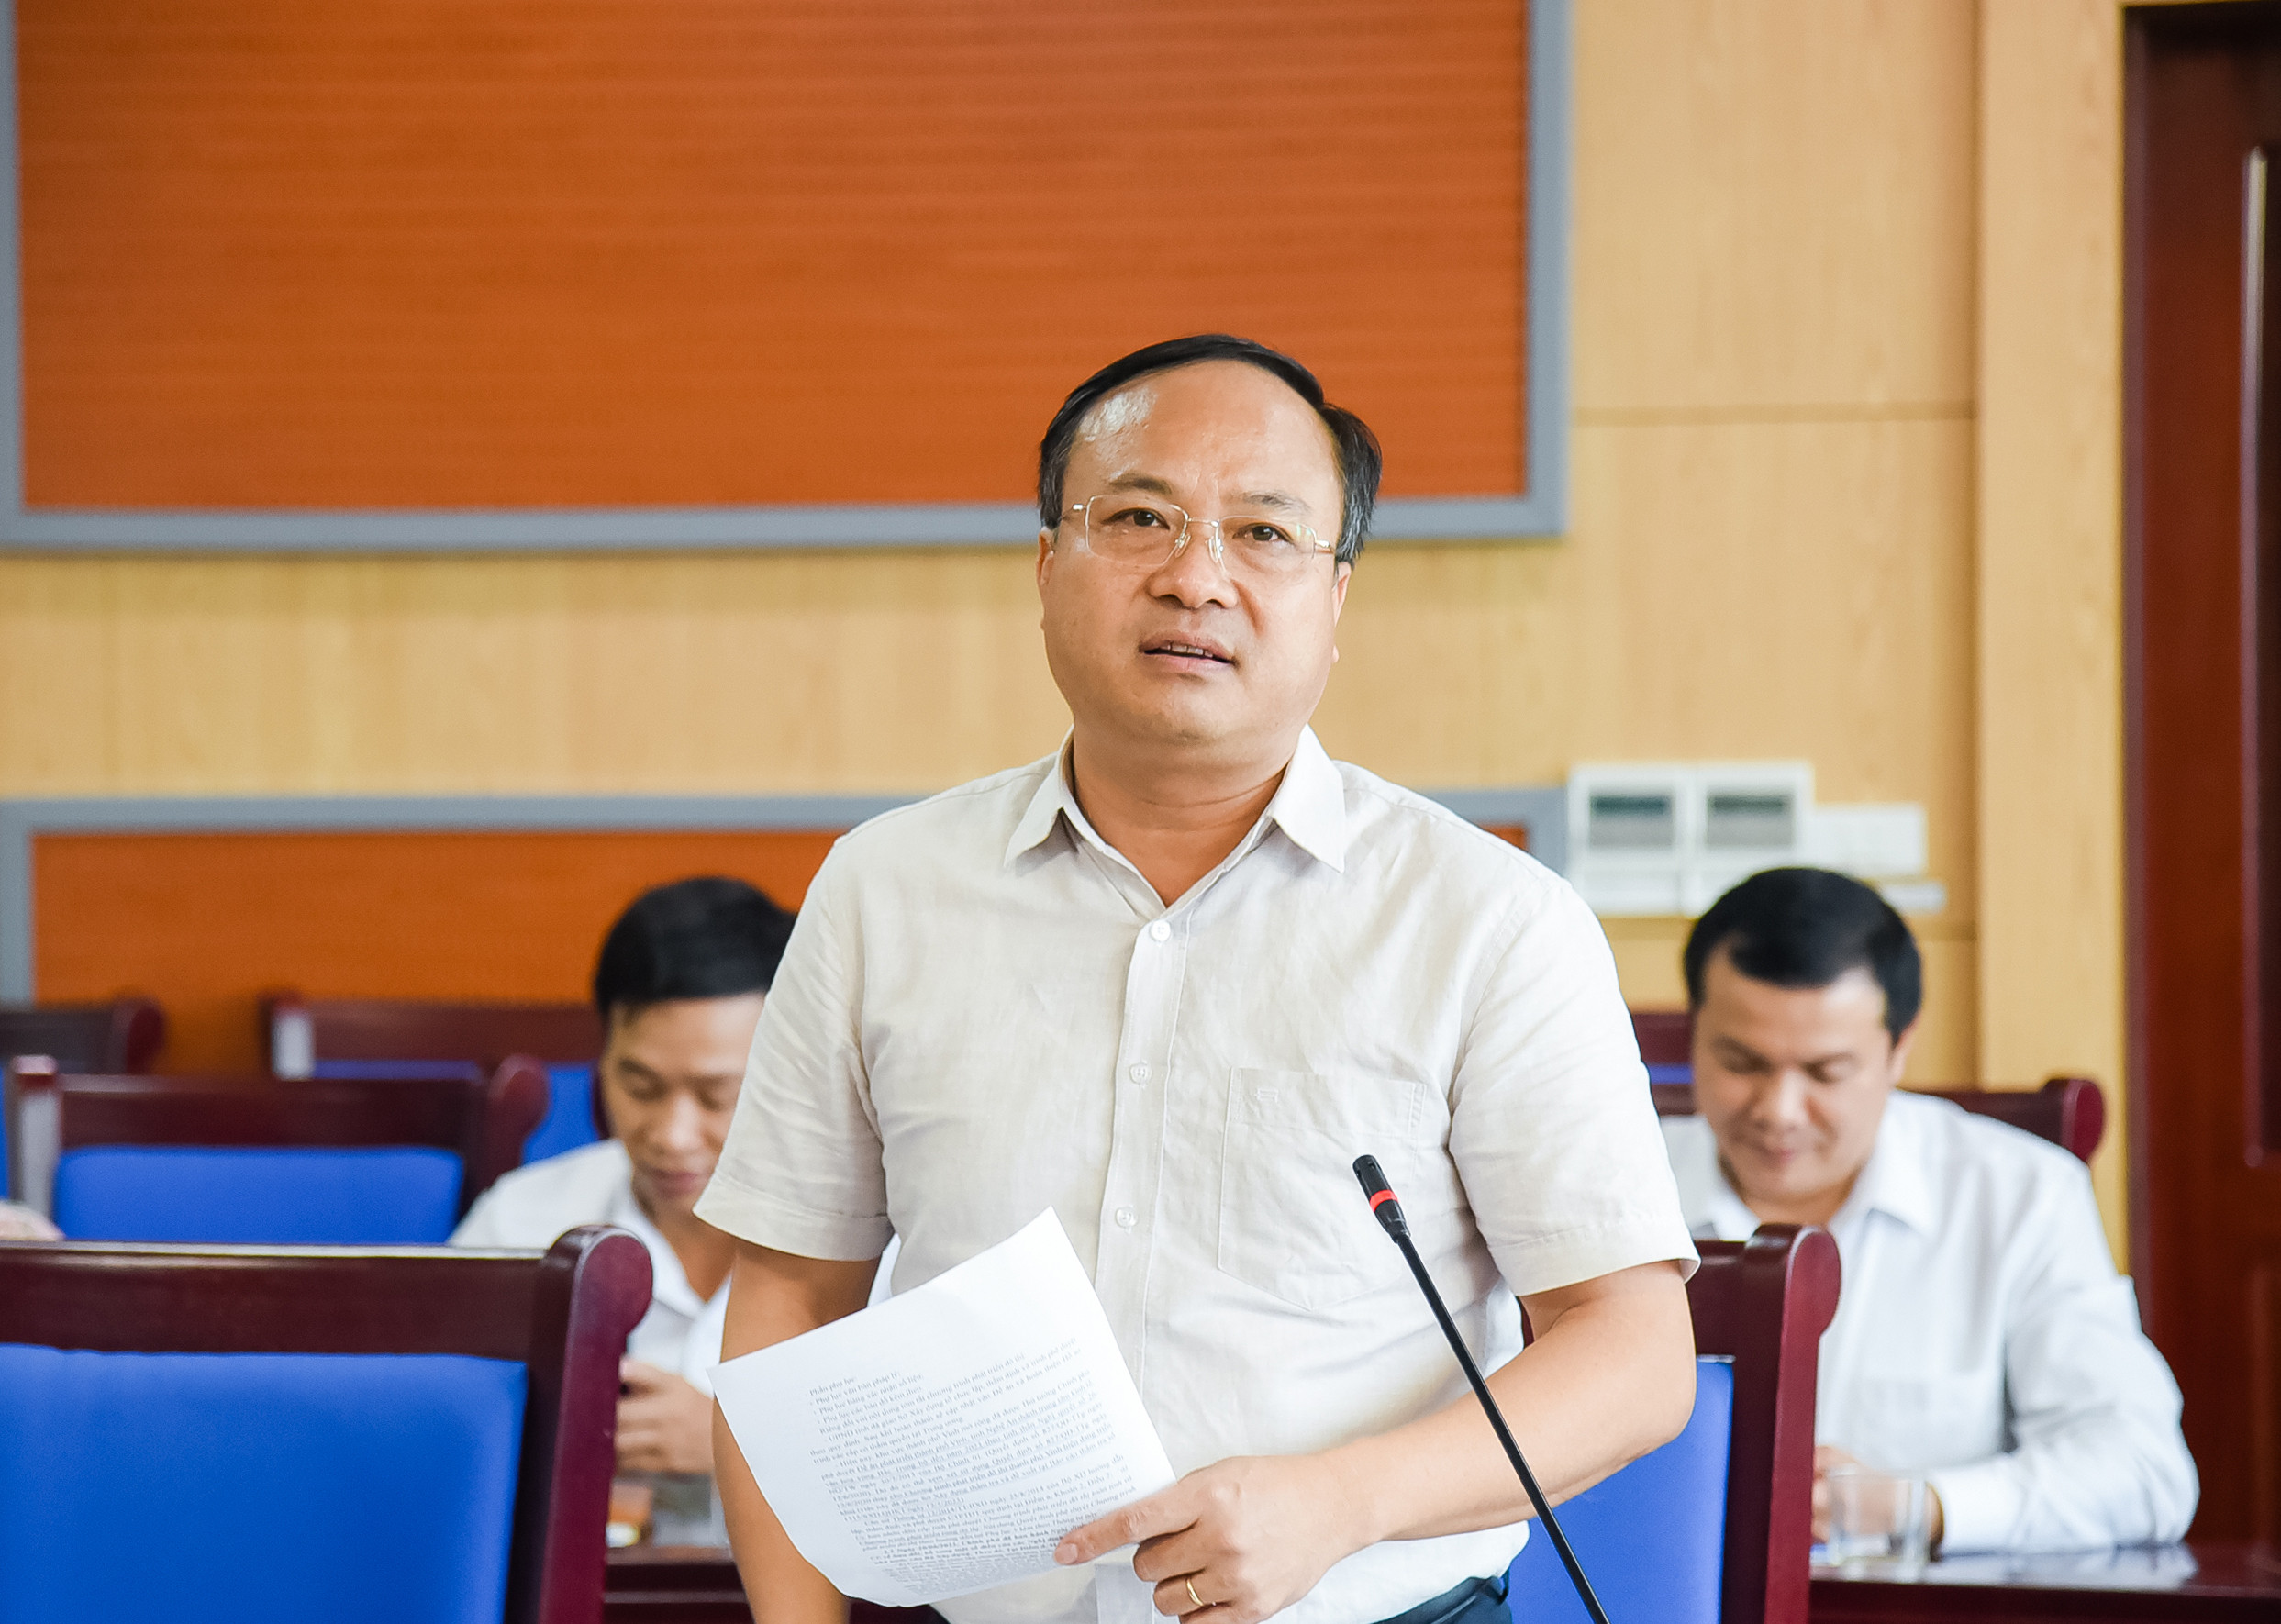 bna-ahung-anh-thanh-le-3471.jpg